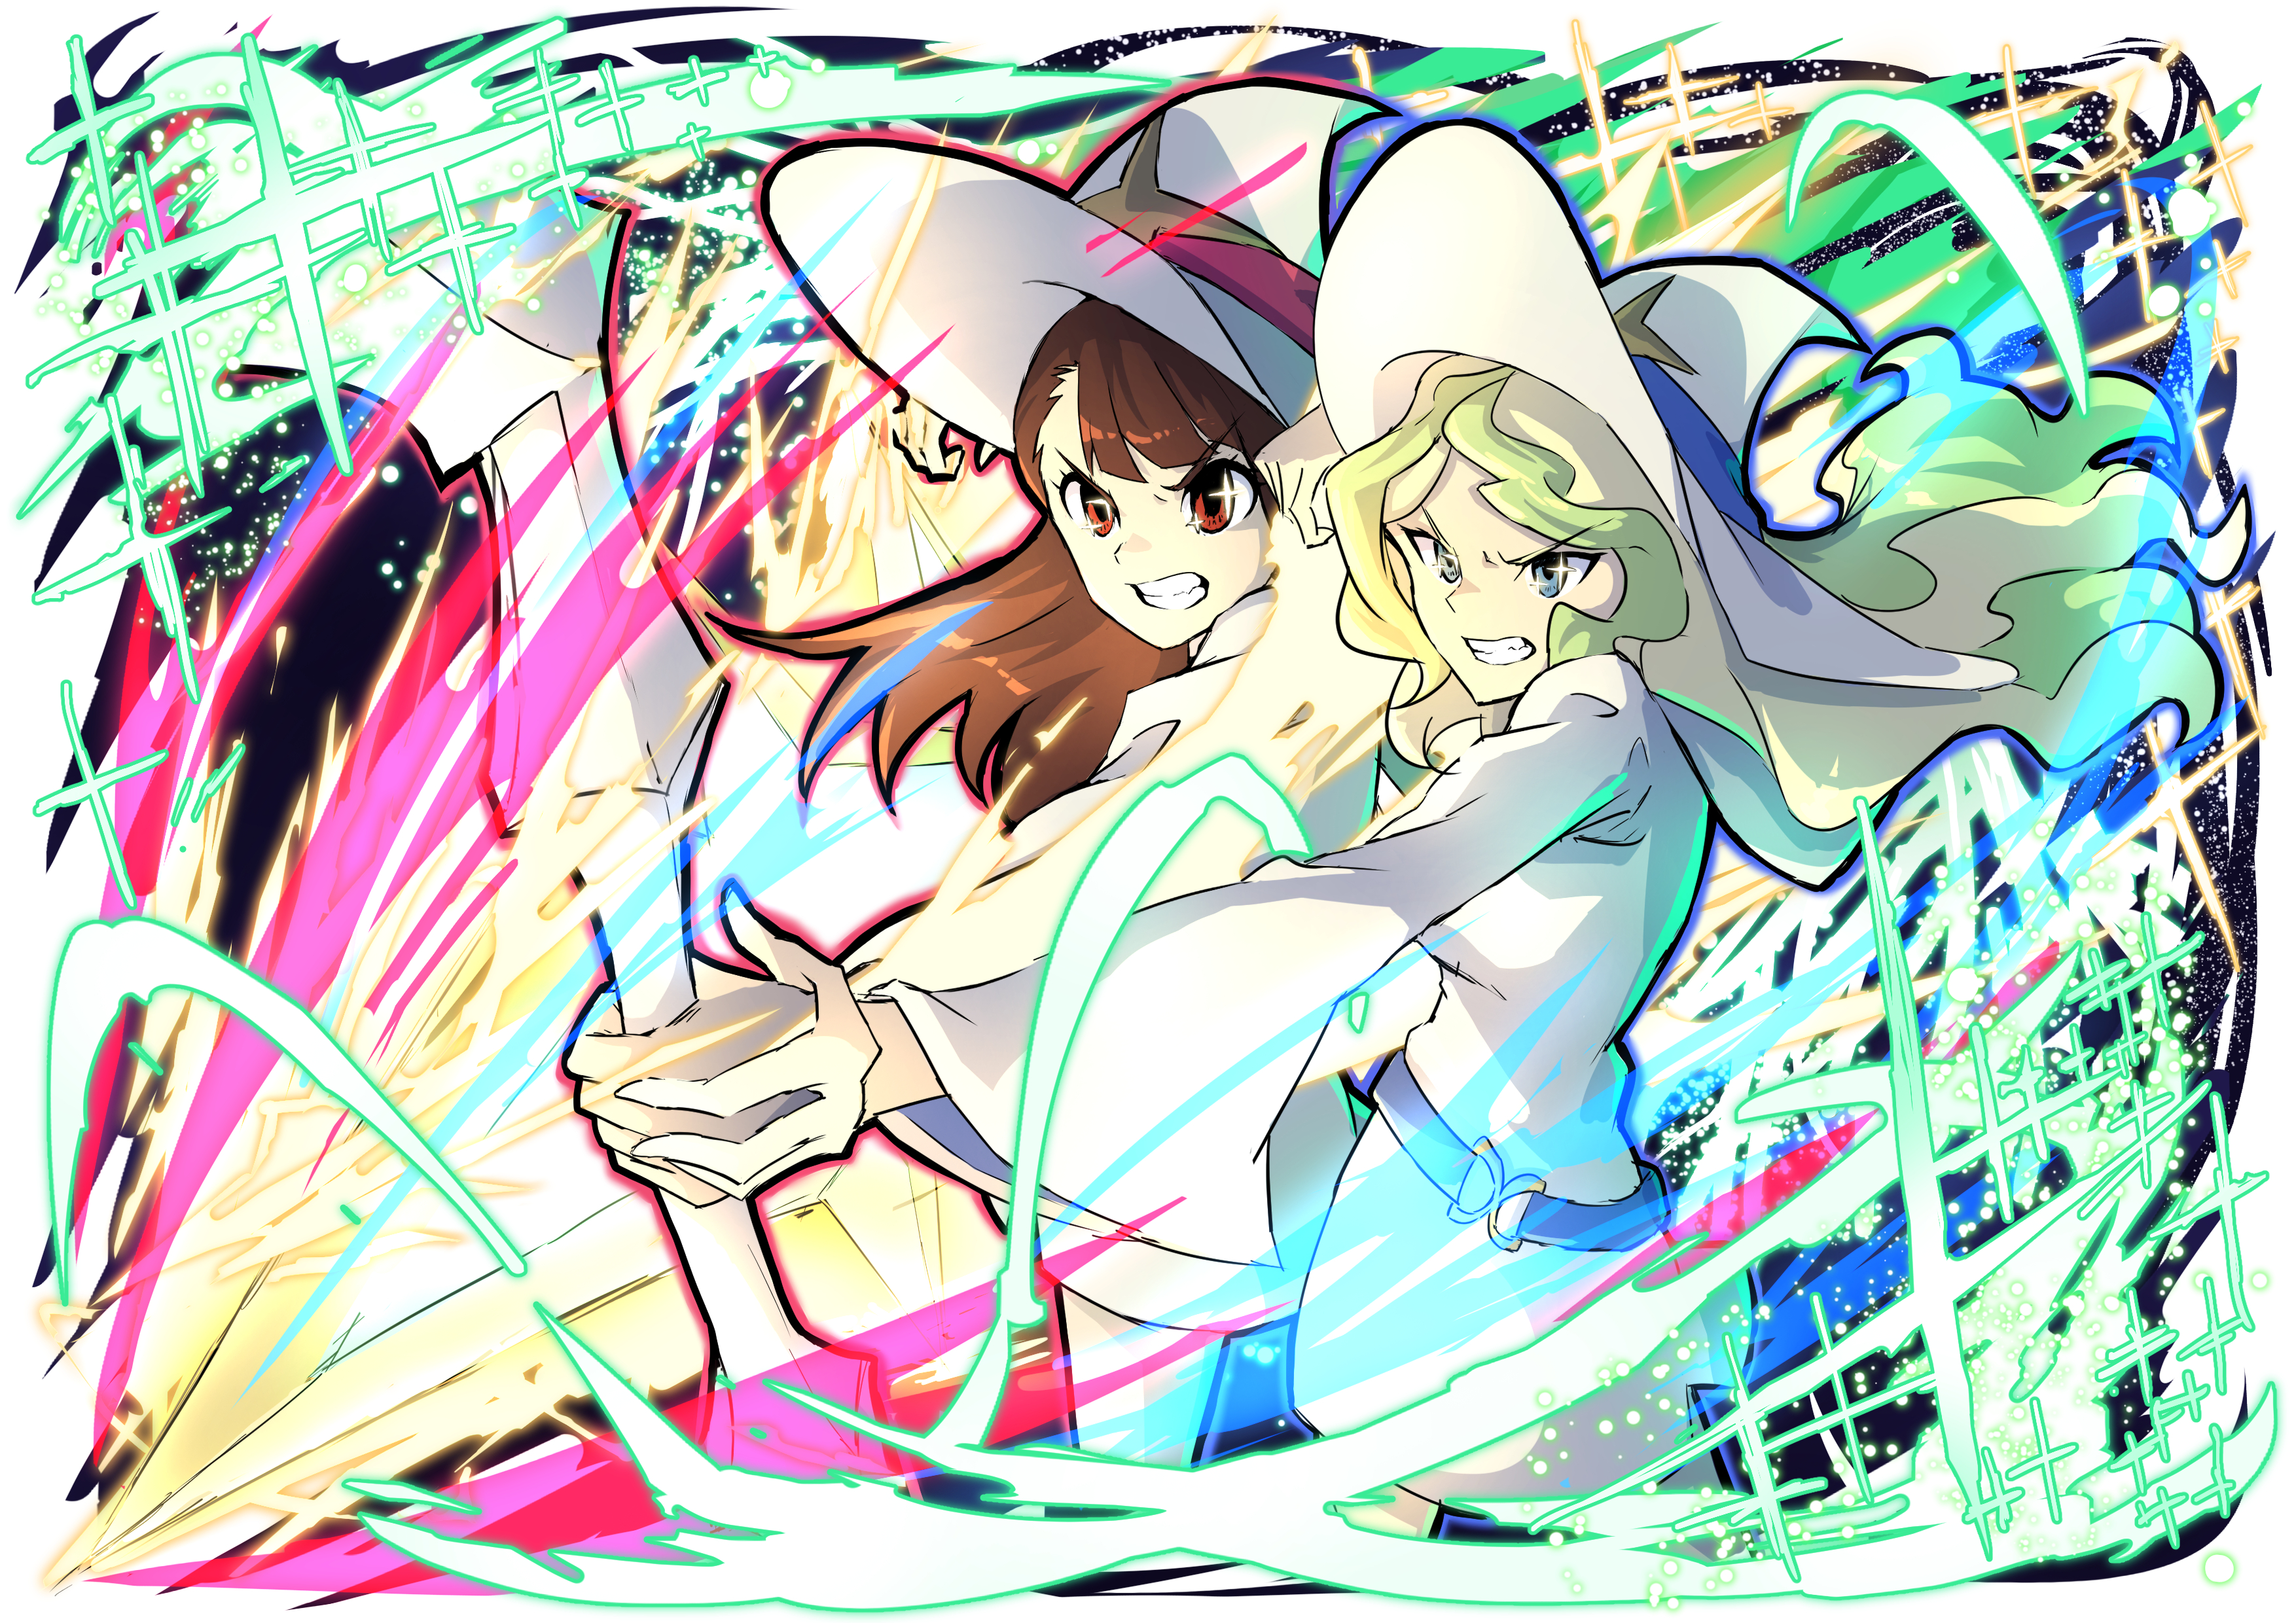 Anime Little Witch Academia HD Wallpaper | Background Image